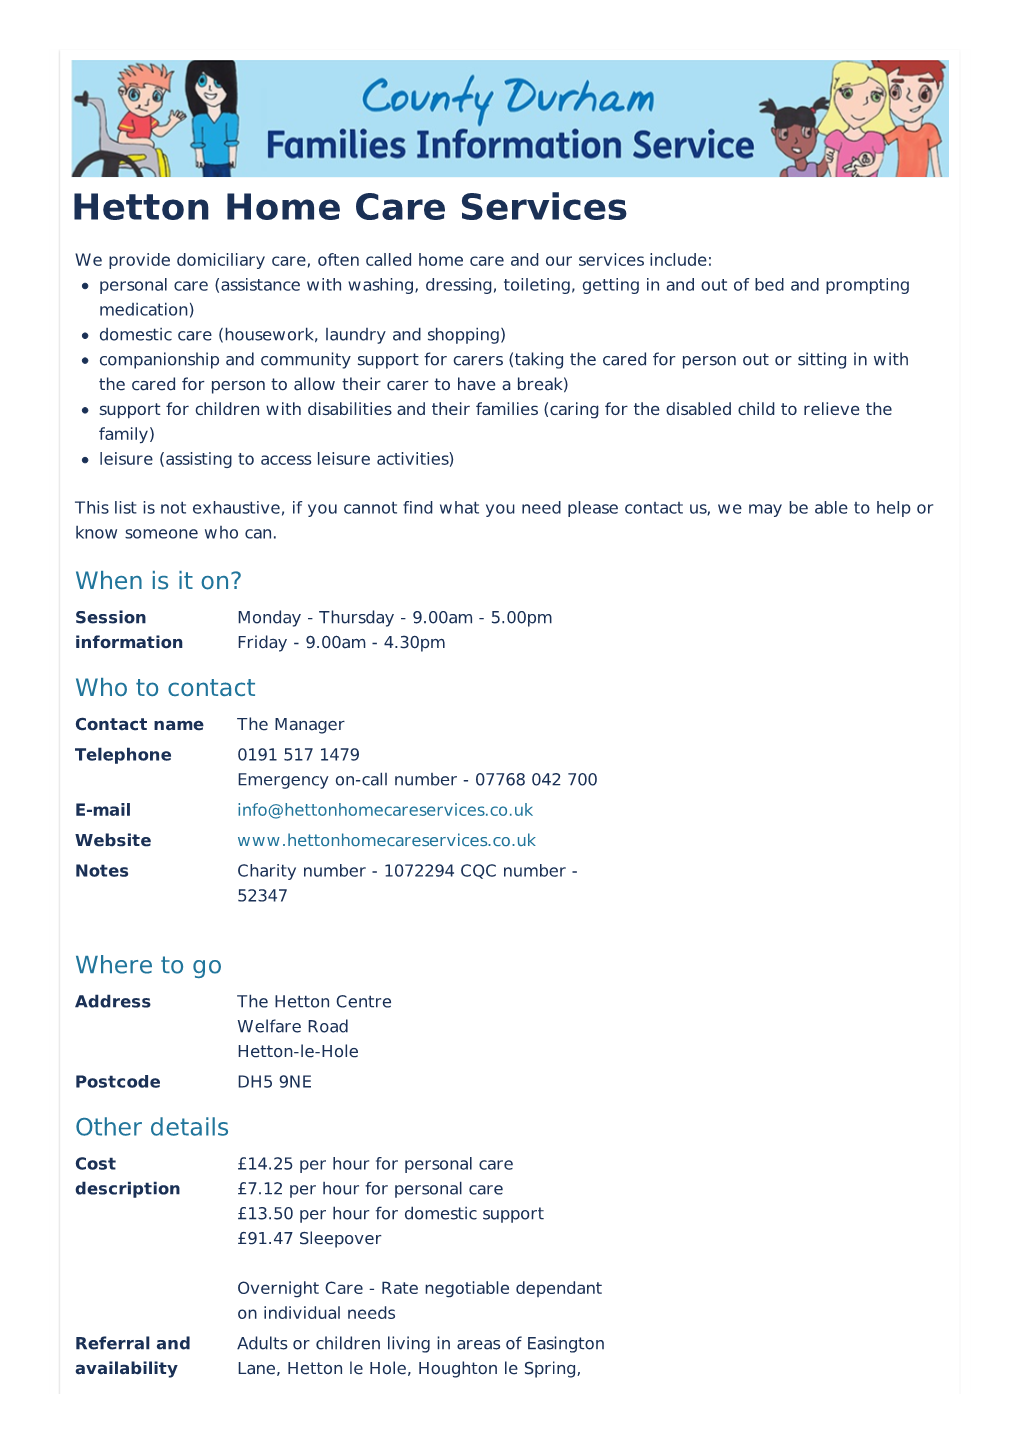 County Durham's Families Information Service | Hetton Home Care Services